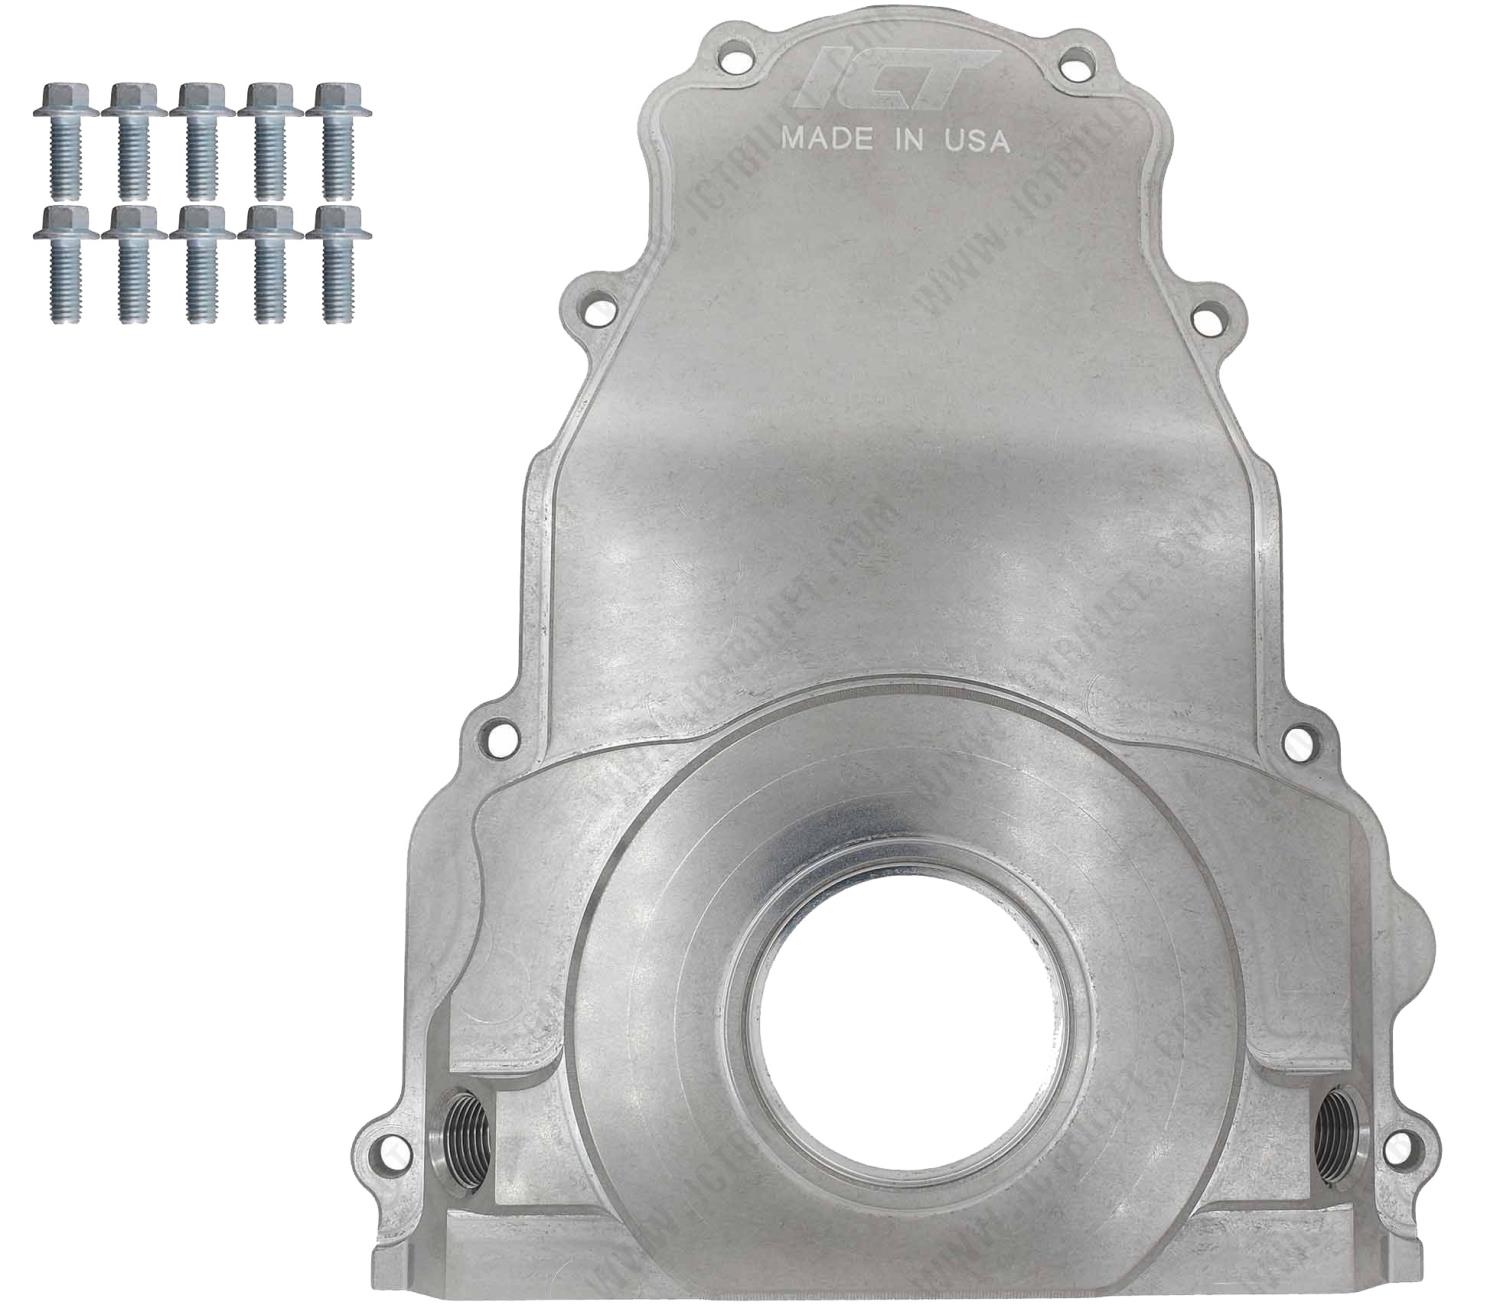 551589-LS01 Billet Timing Chain Cover w/(2) Turbo Oil